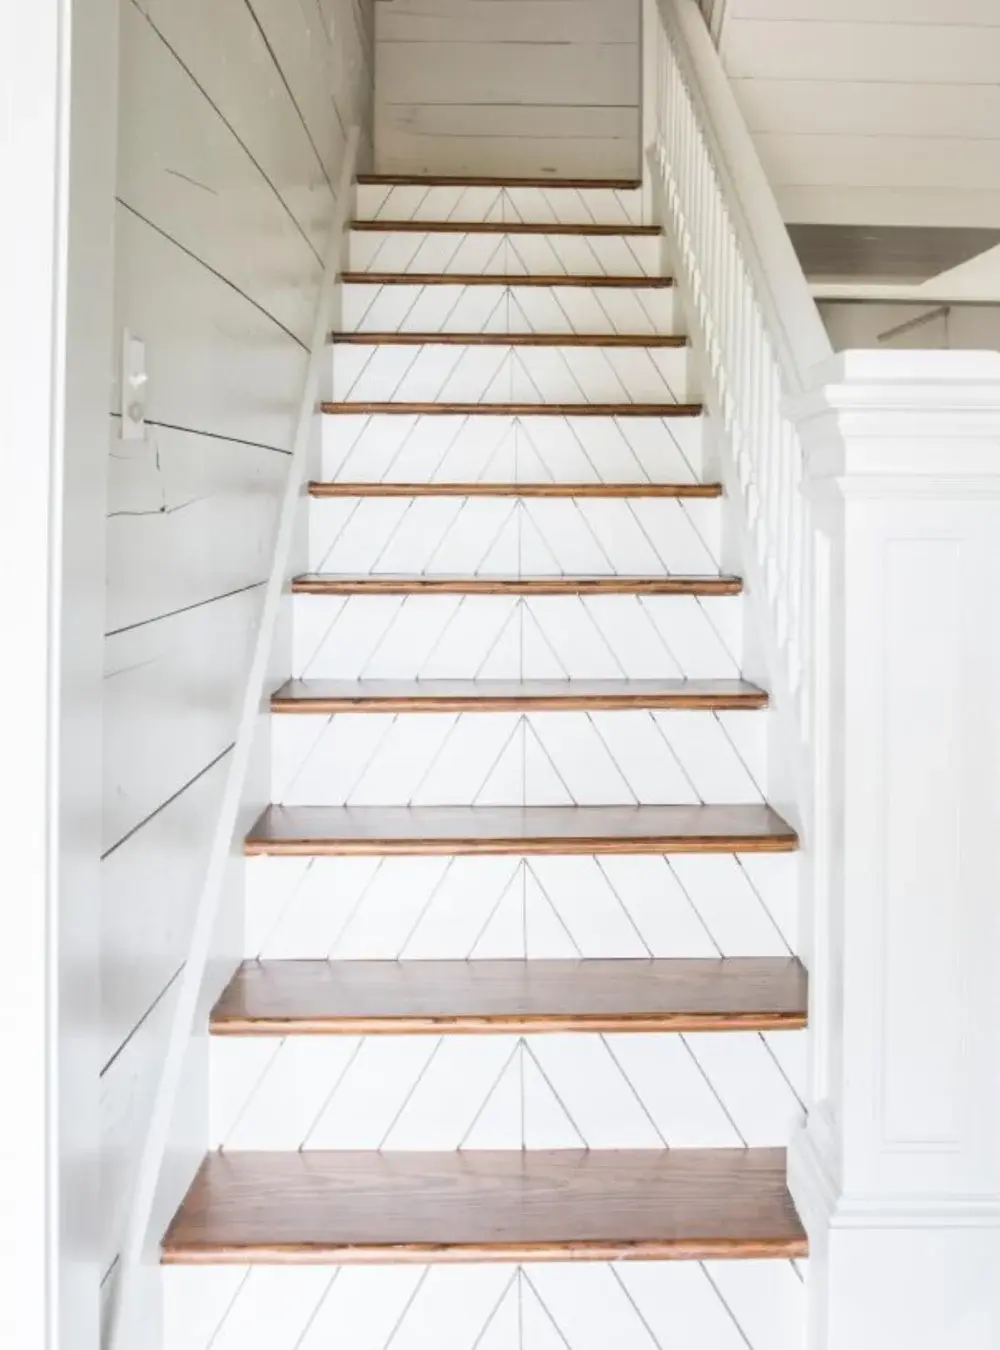 For Blog Only - Chip and Joanna Gaines, HGTV's Fixer Upper - Shiplap Staircase